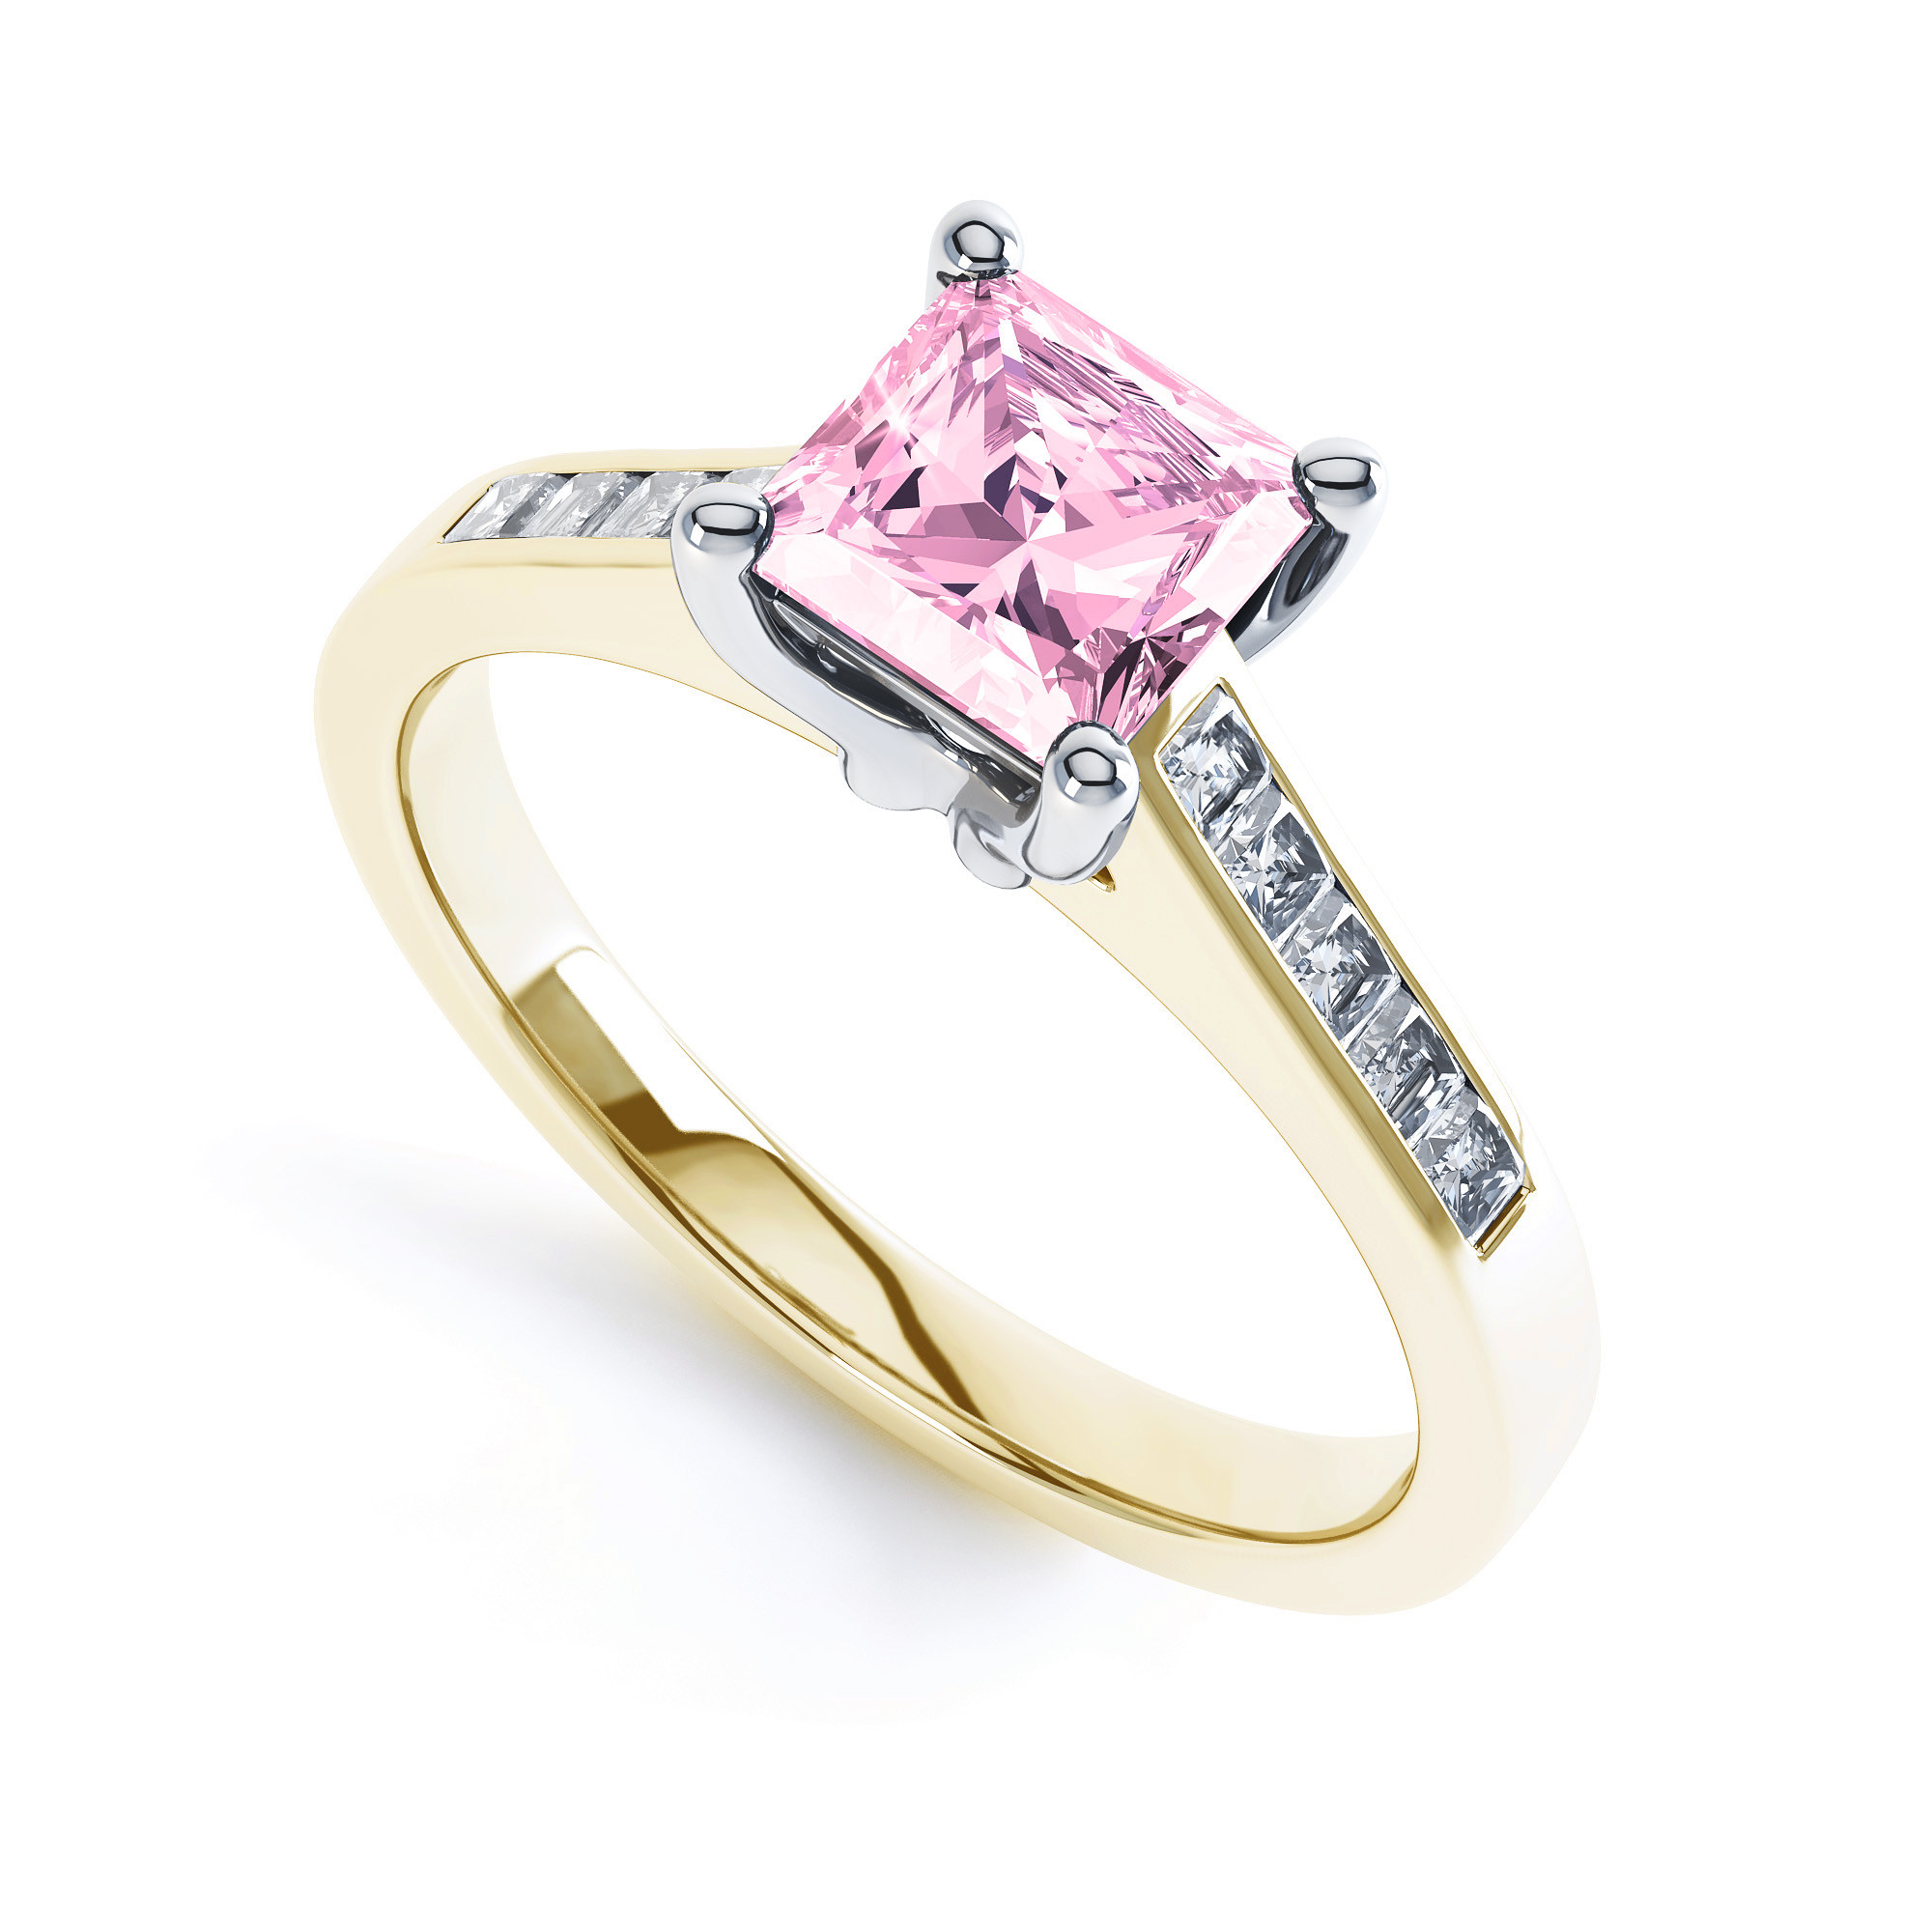 Diamond And Pink Sapphire Engagement Ring
 Square Pink Sapphire & Diamond Engagement Ring